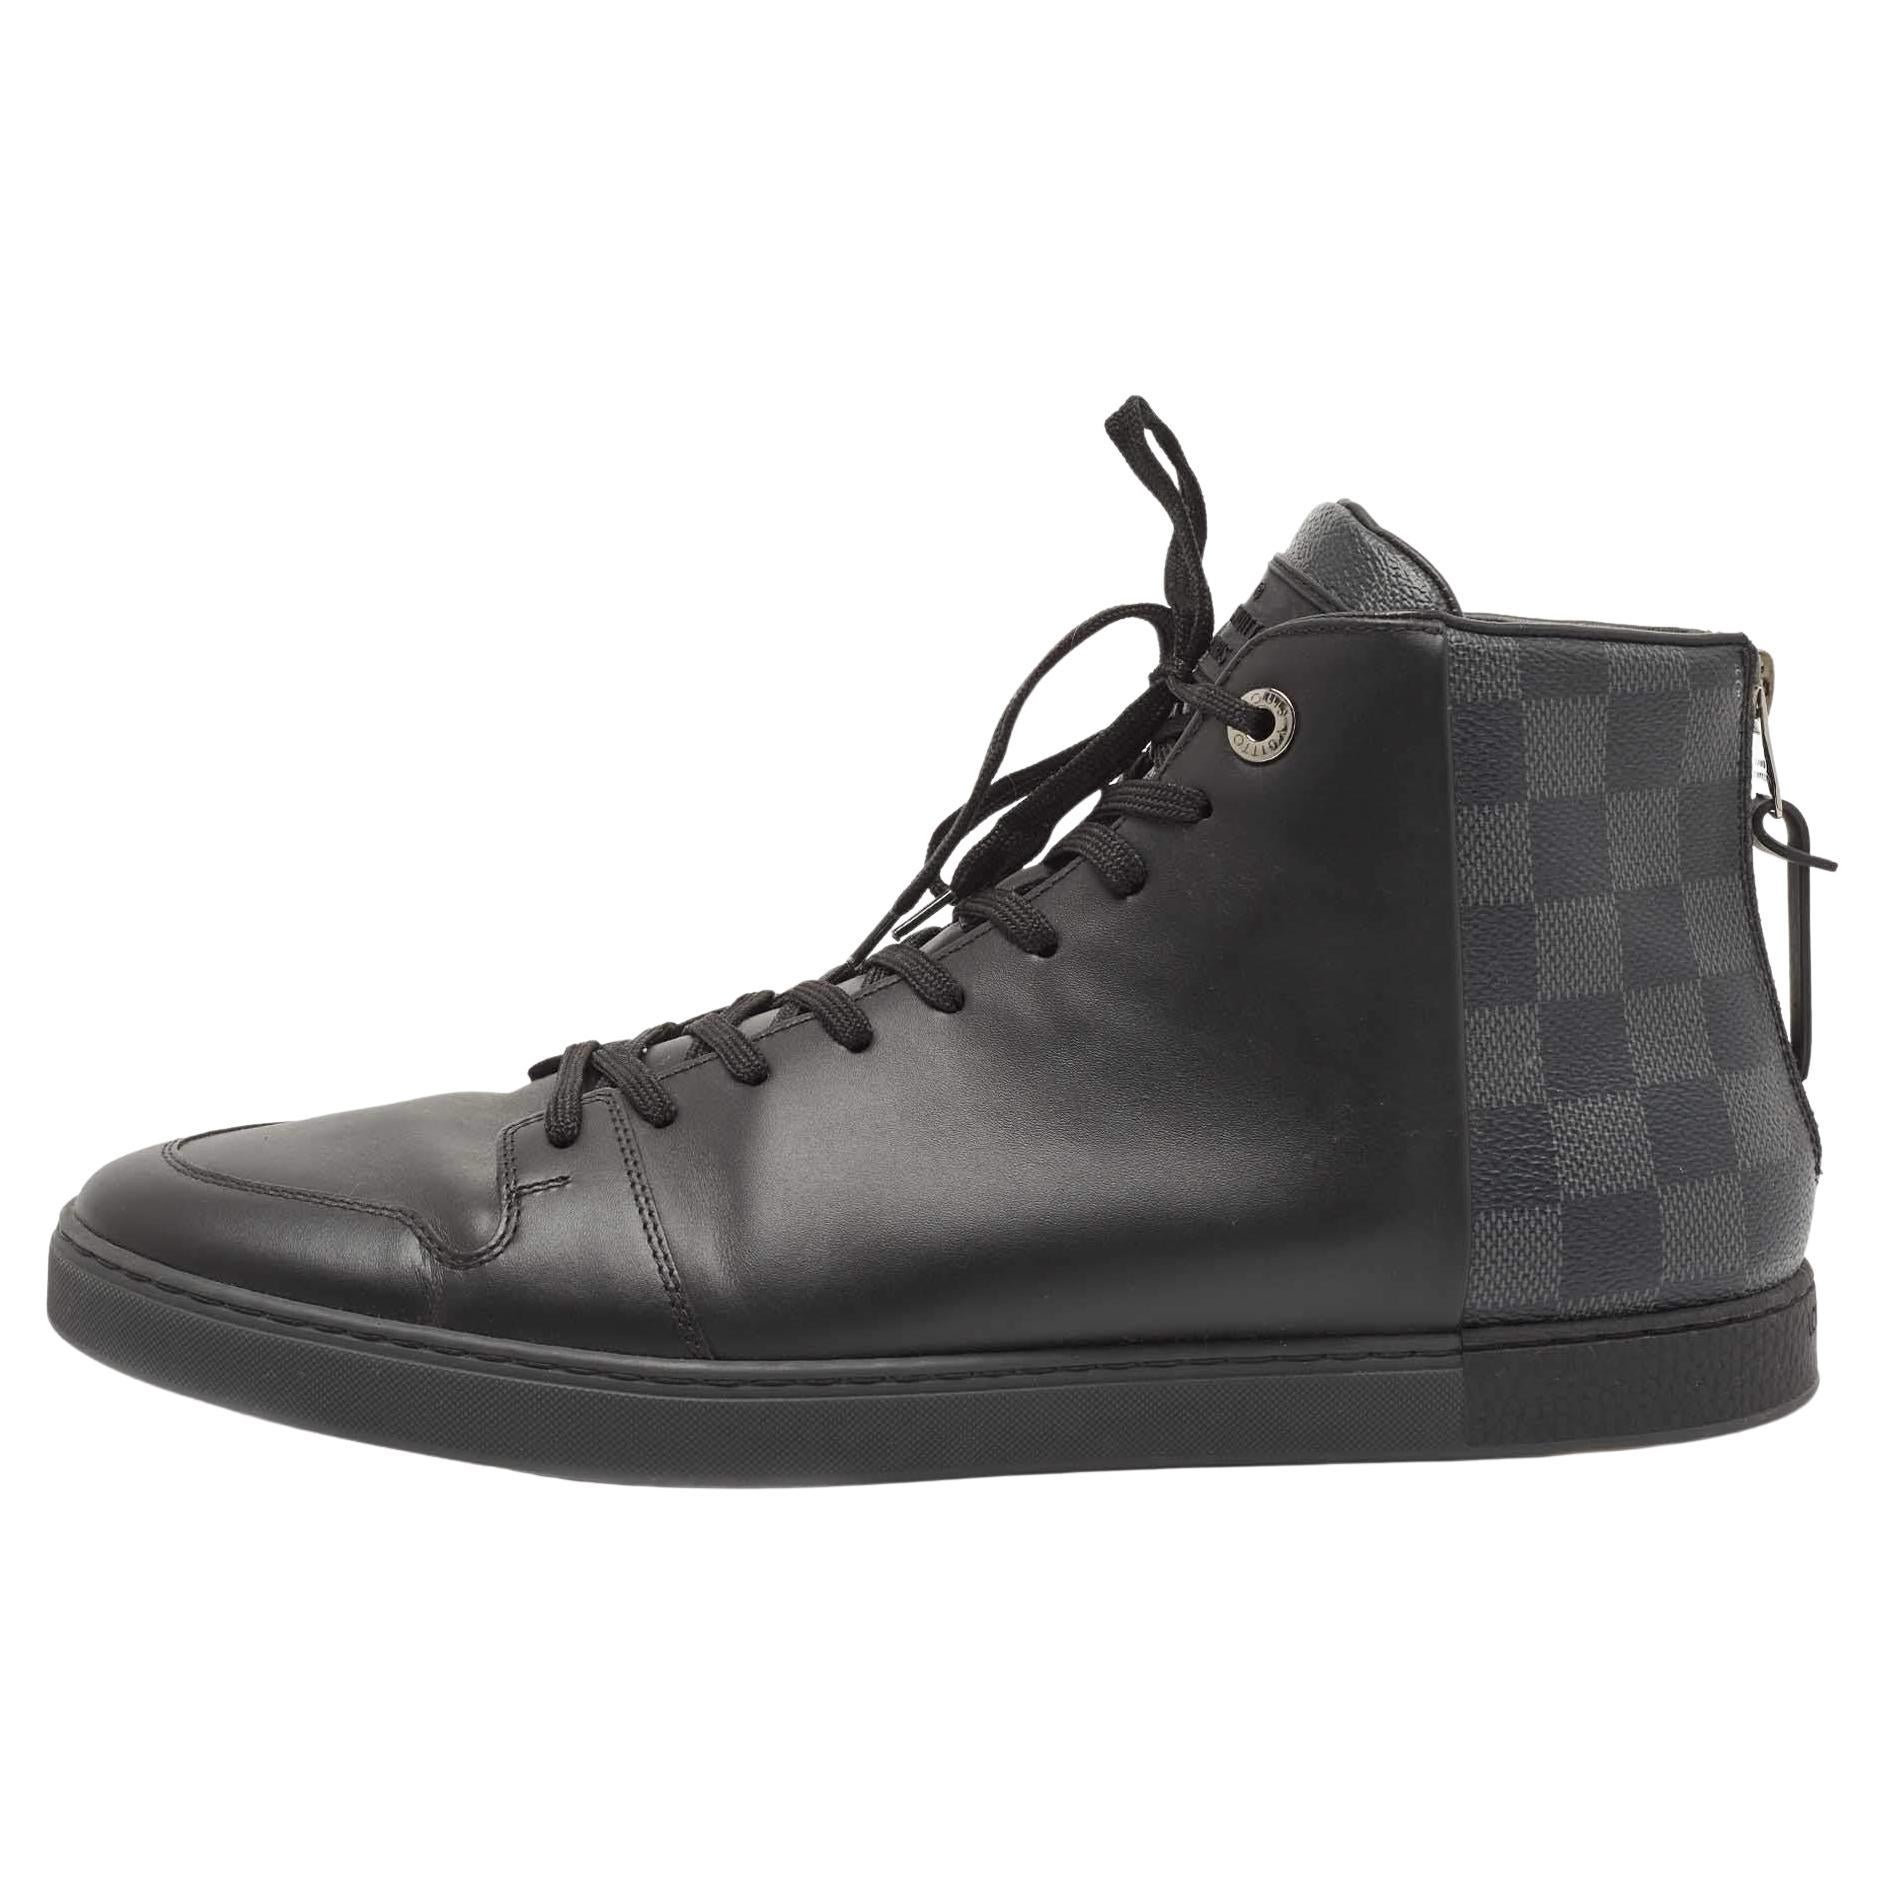 Louis Vuitton Sneaker Damier Graphite Suede High Mid Top Leather